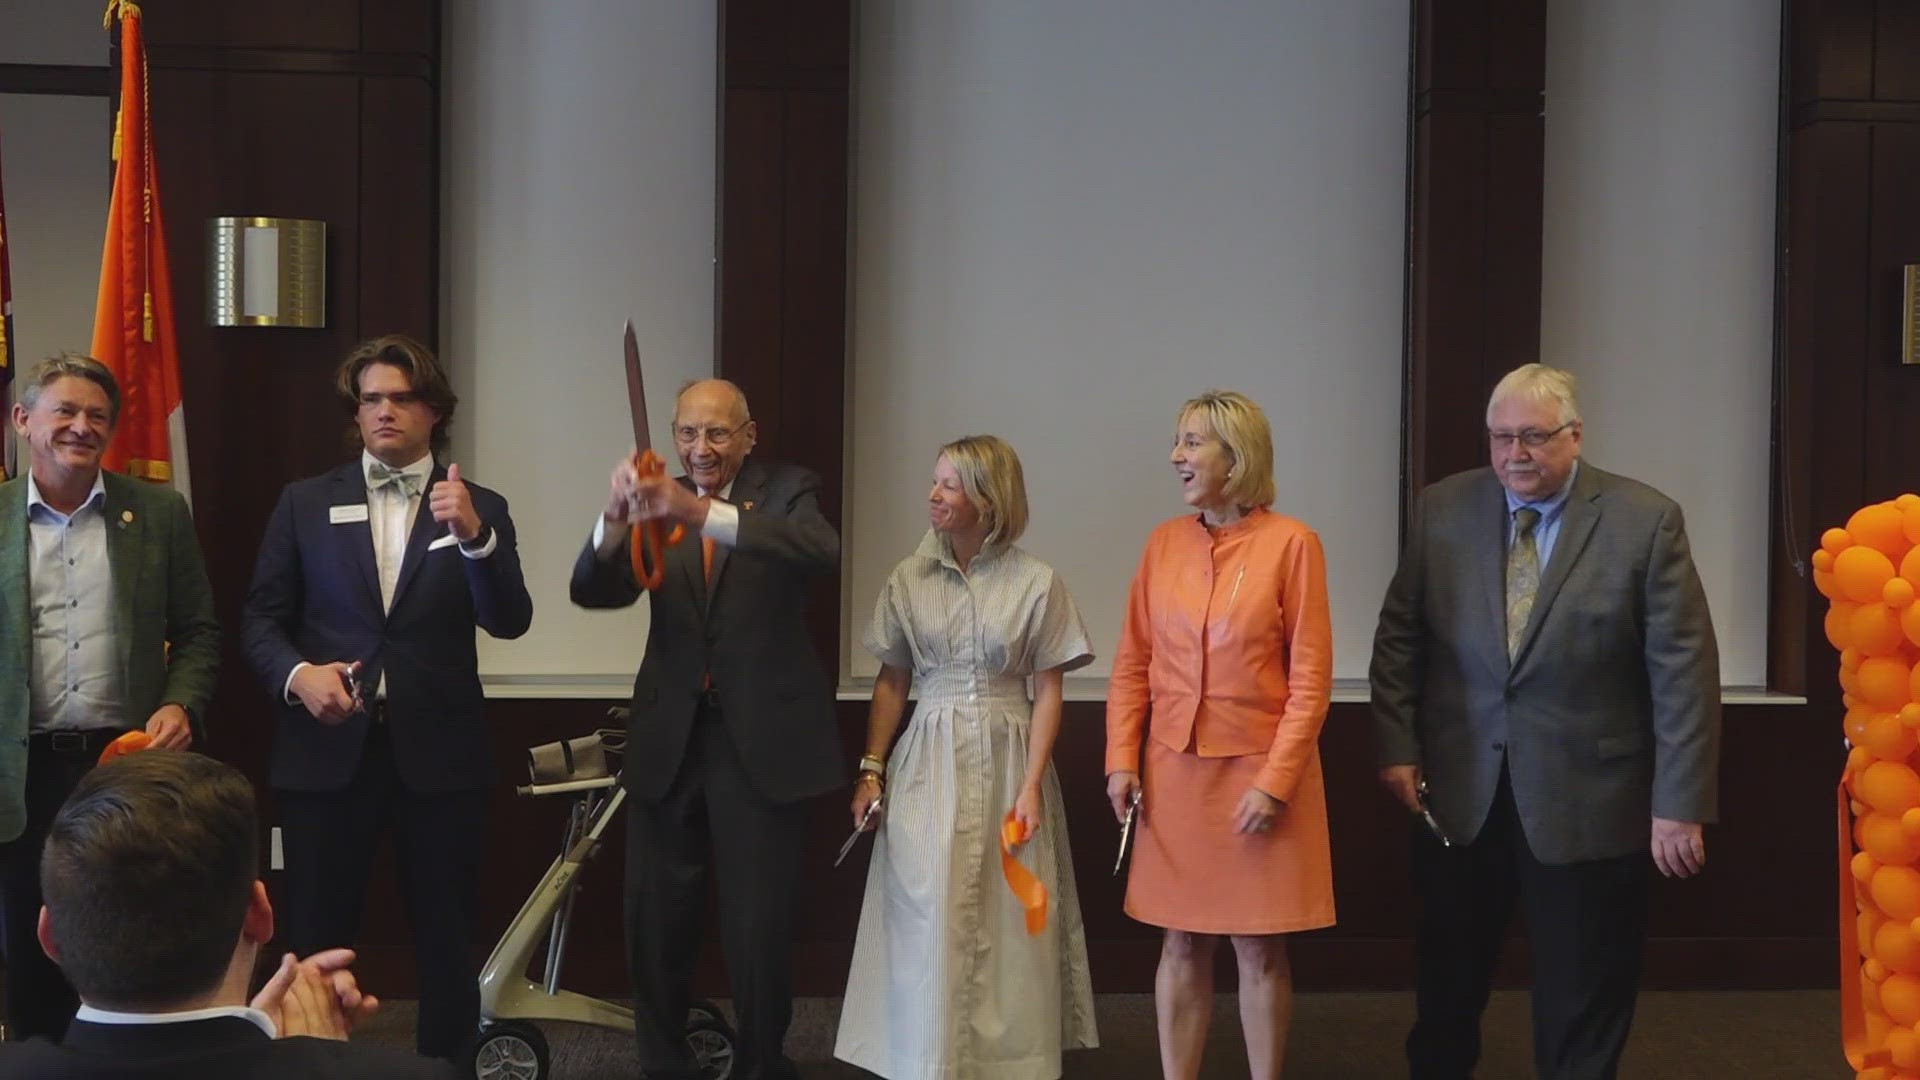 Leaders at the University of Tennessee celebrated the name change on Friday.